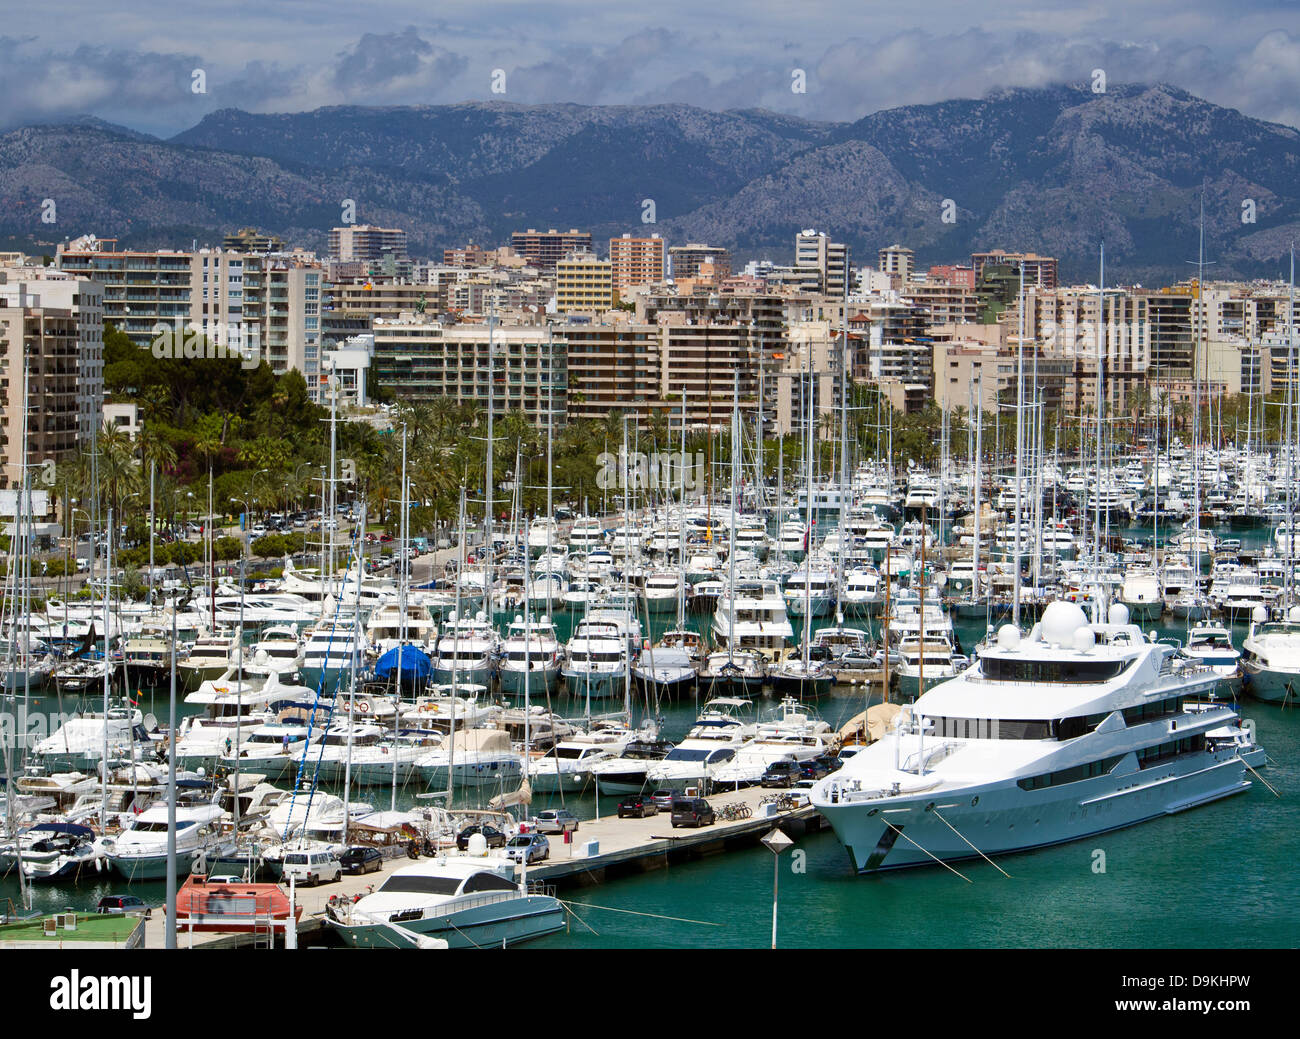 Pleasure boats and yachts moored in the harbour of Palma de Mallorca, Spain Stock Photo